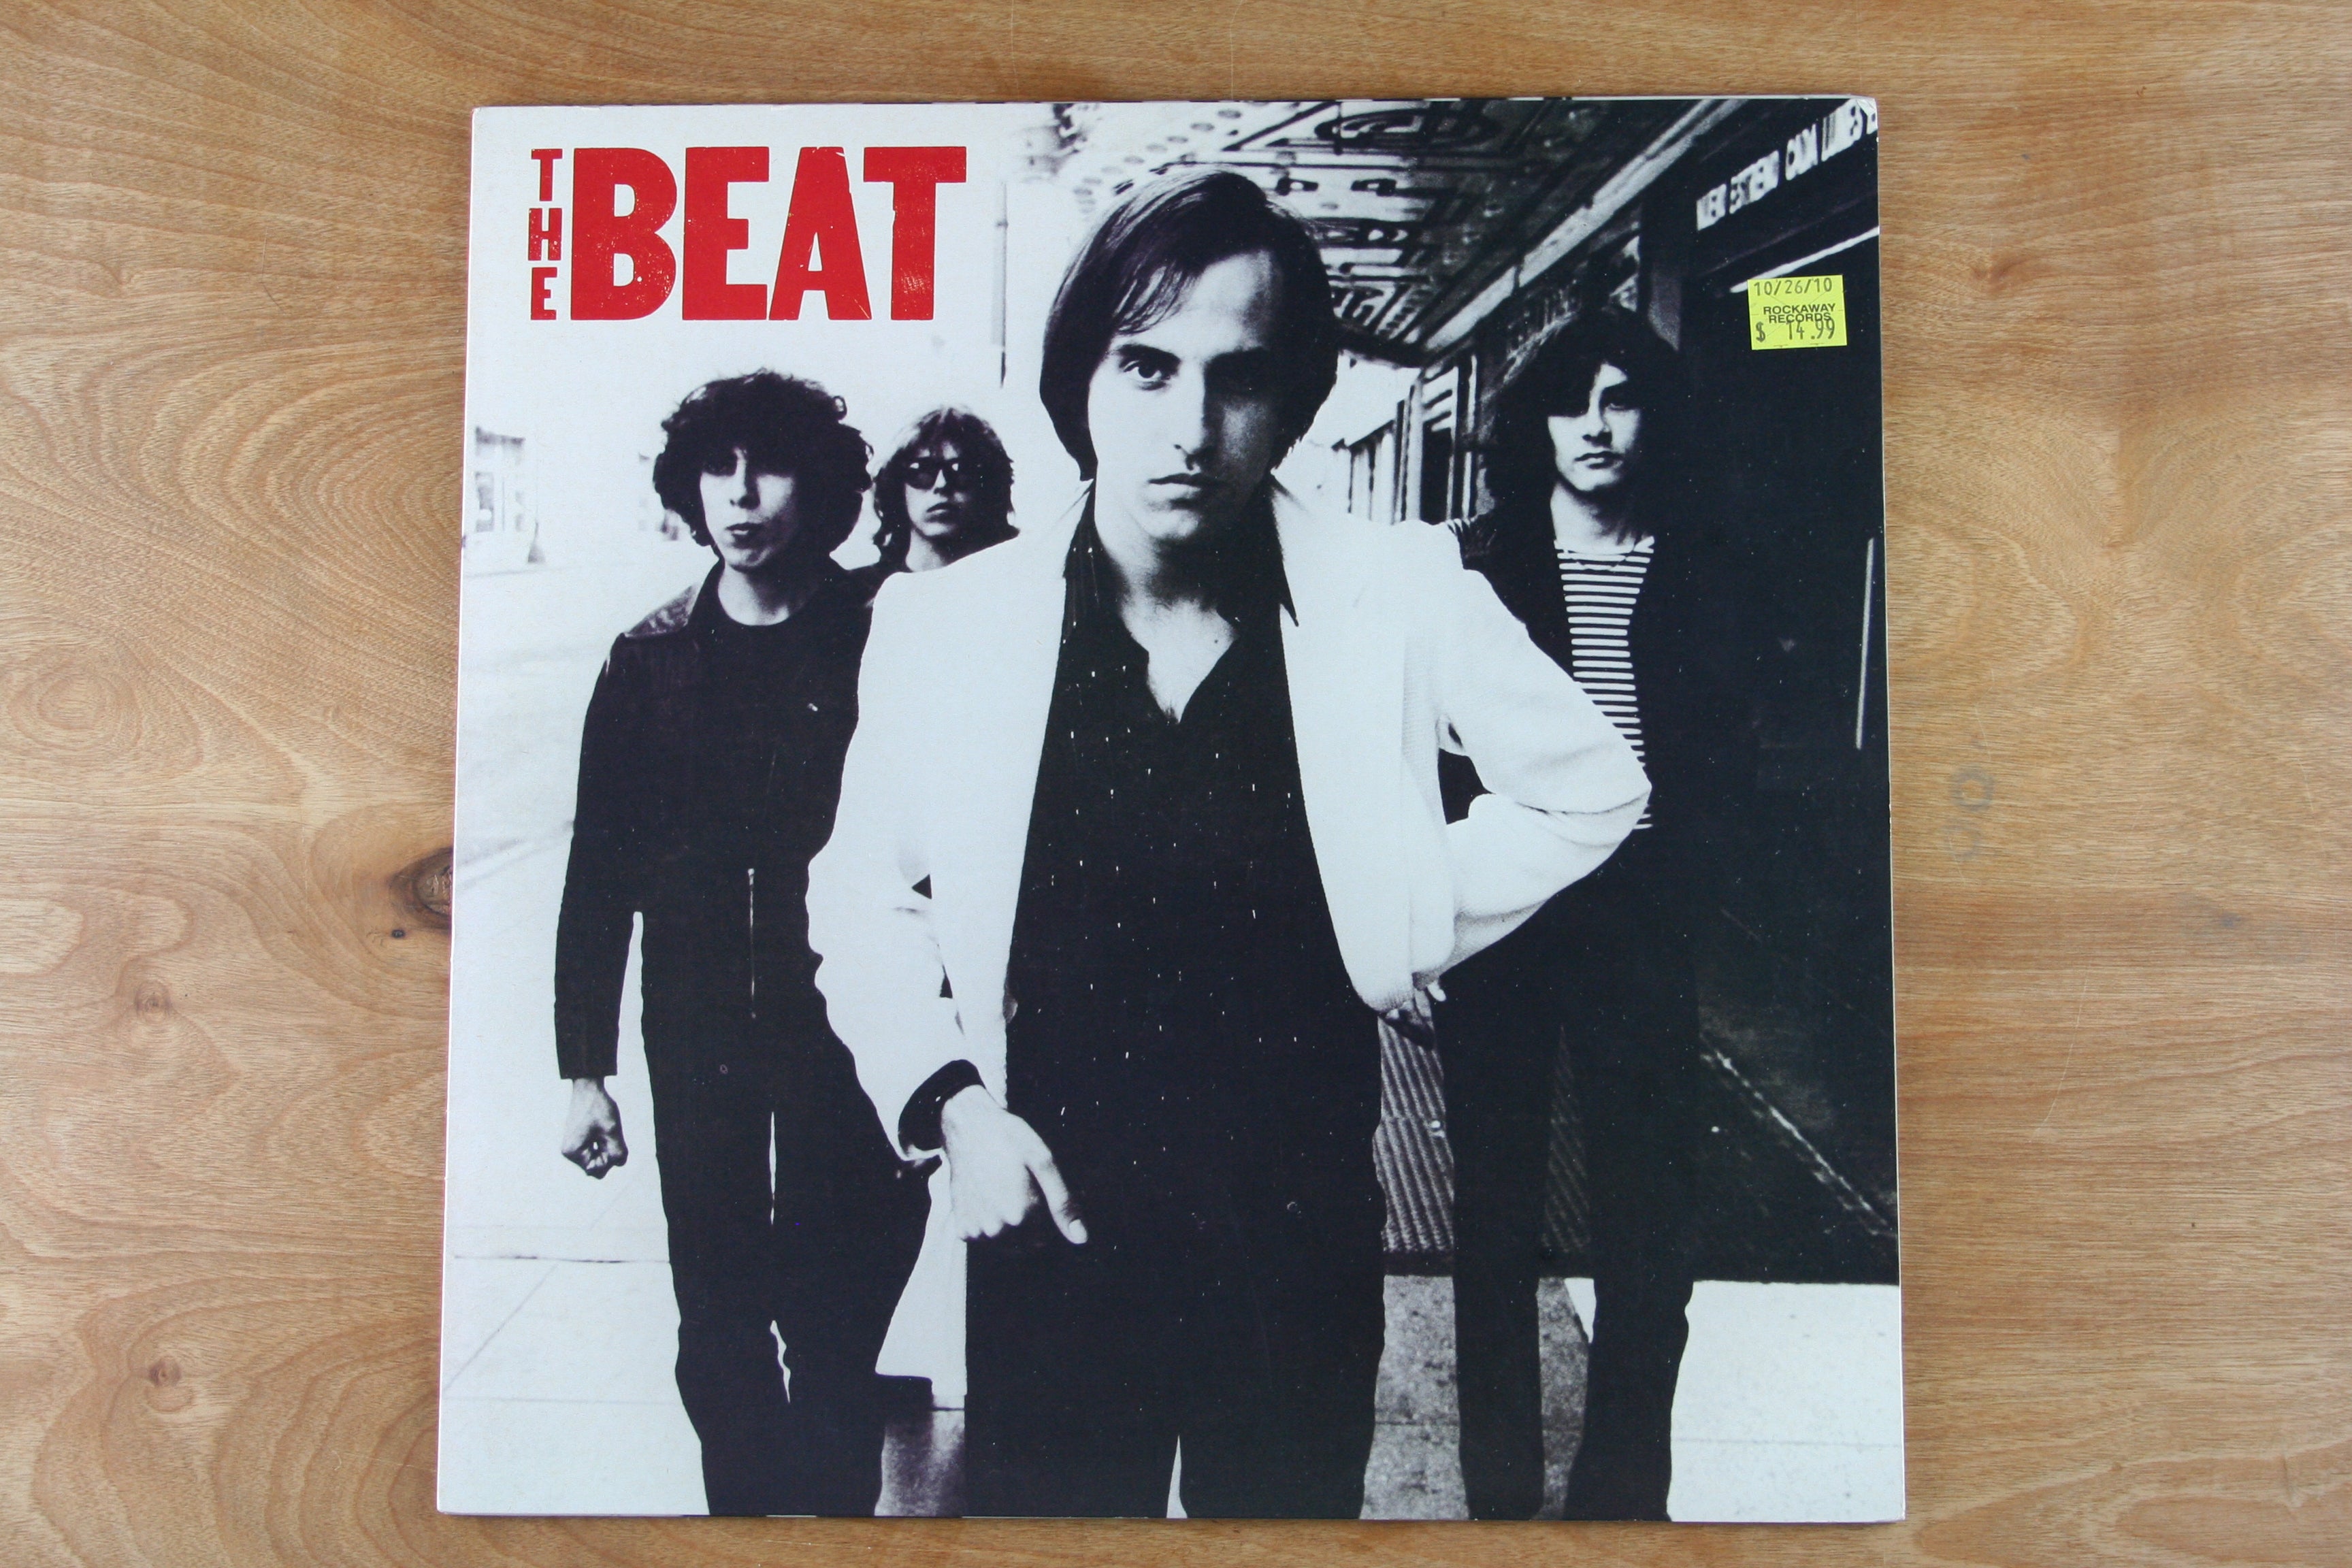 The Beat ‎– The Beat